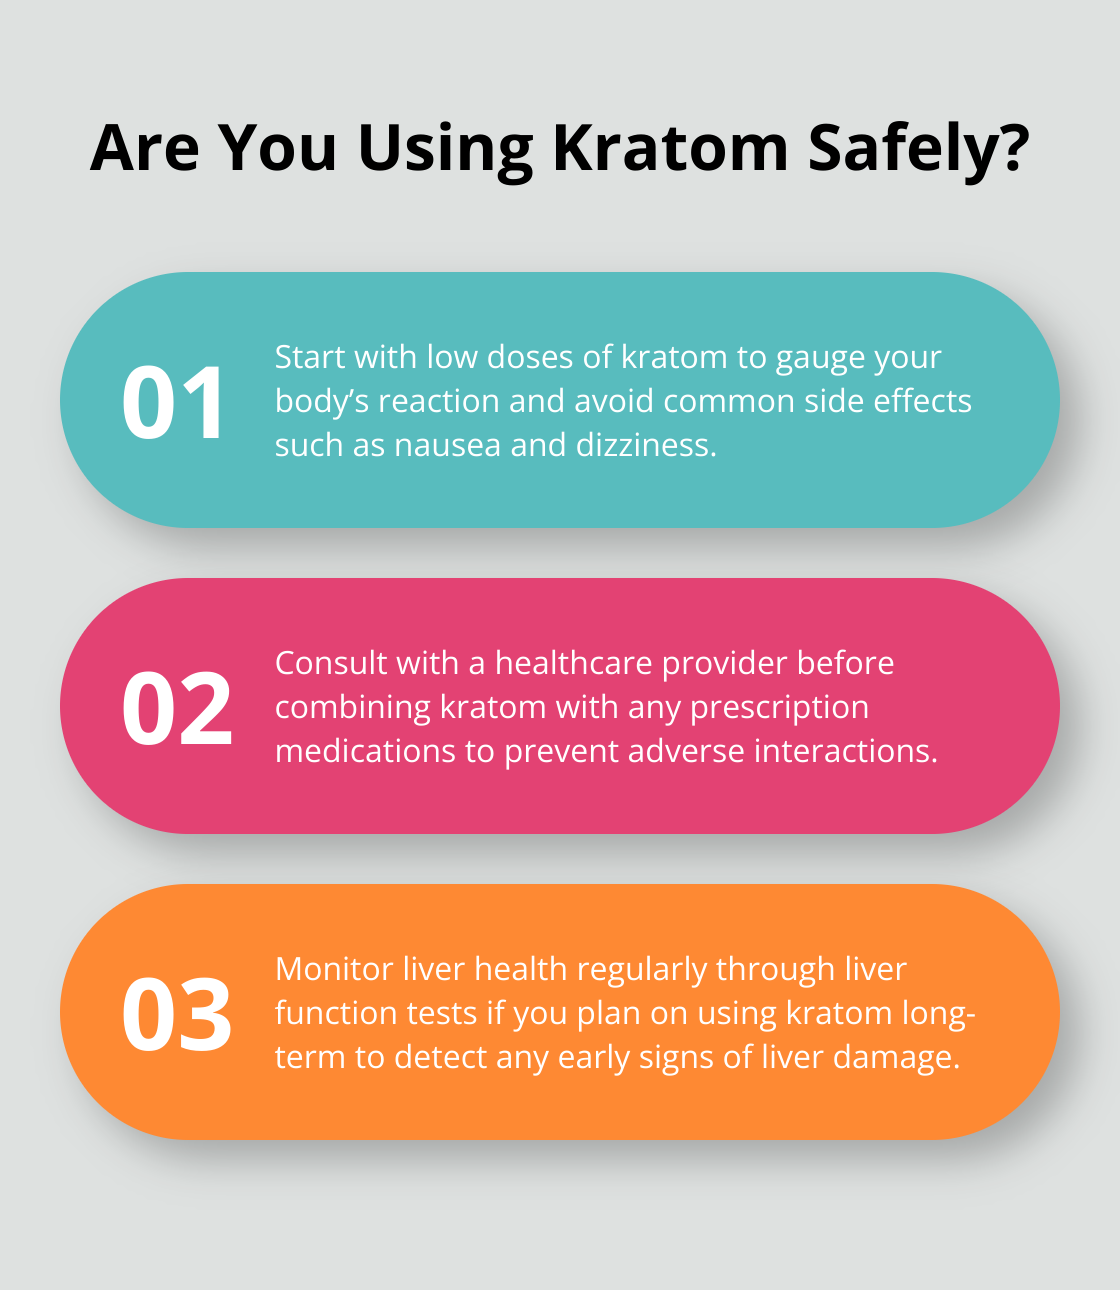 Fact - Are You Using Kratom Safely?